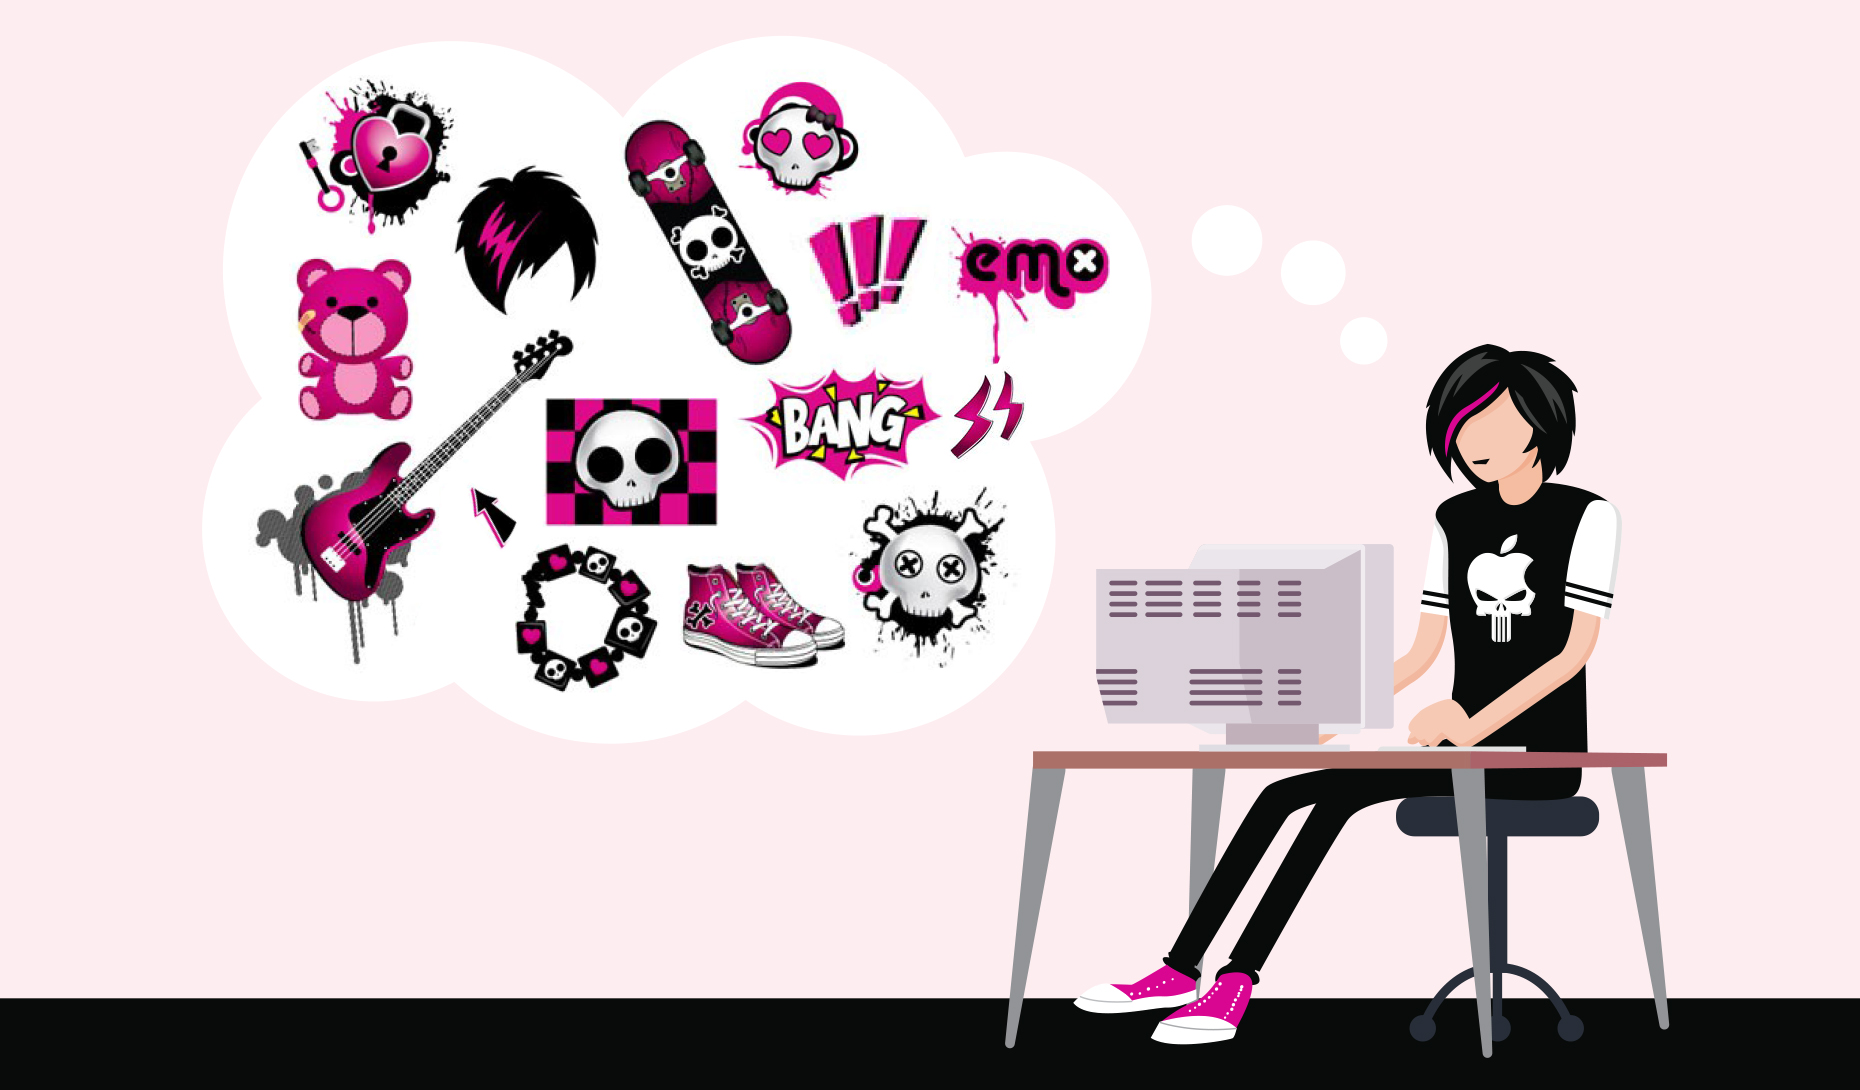 wallpaper tang circa late 2000s early 2010s by RamiYT on DeviantArt